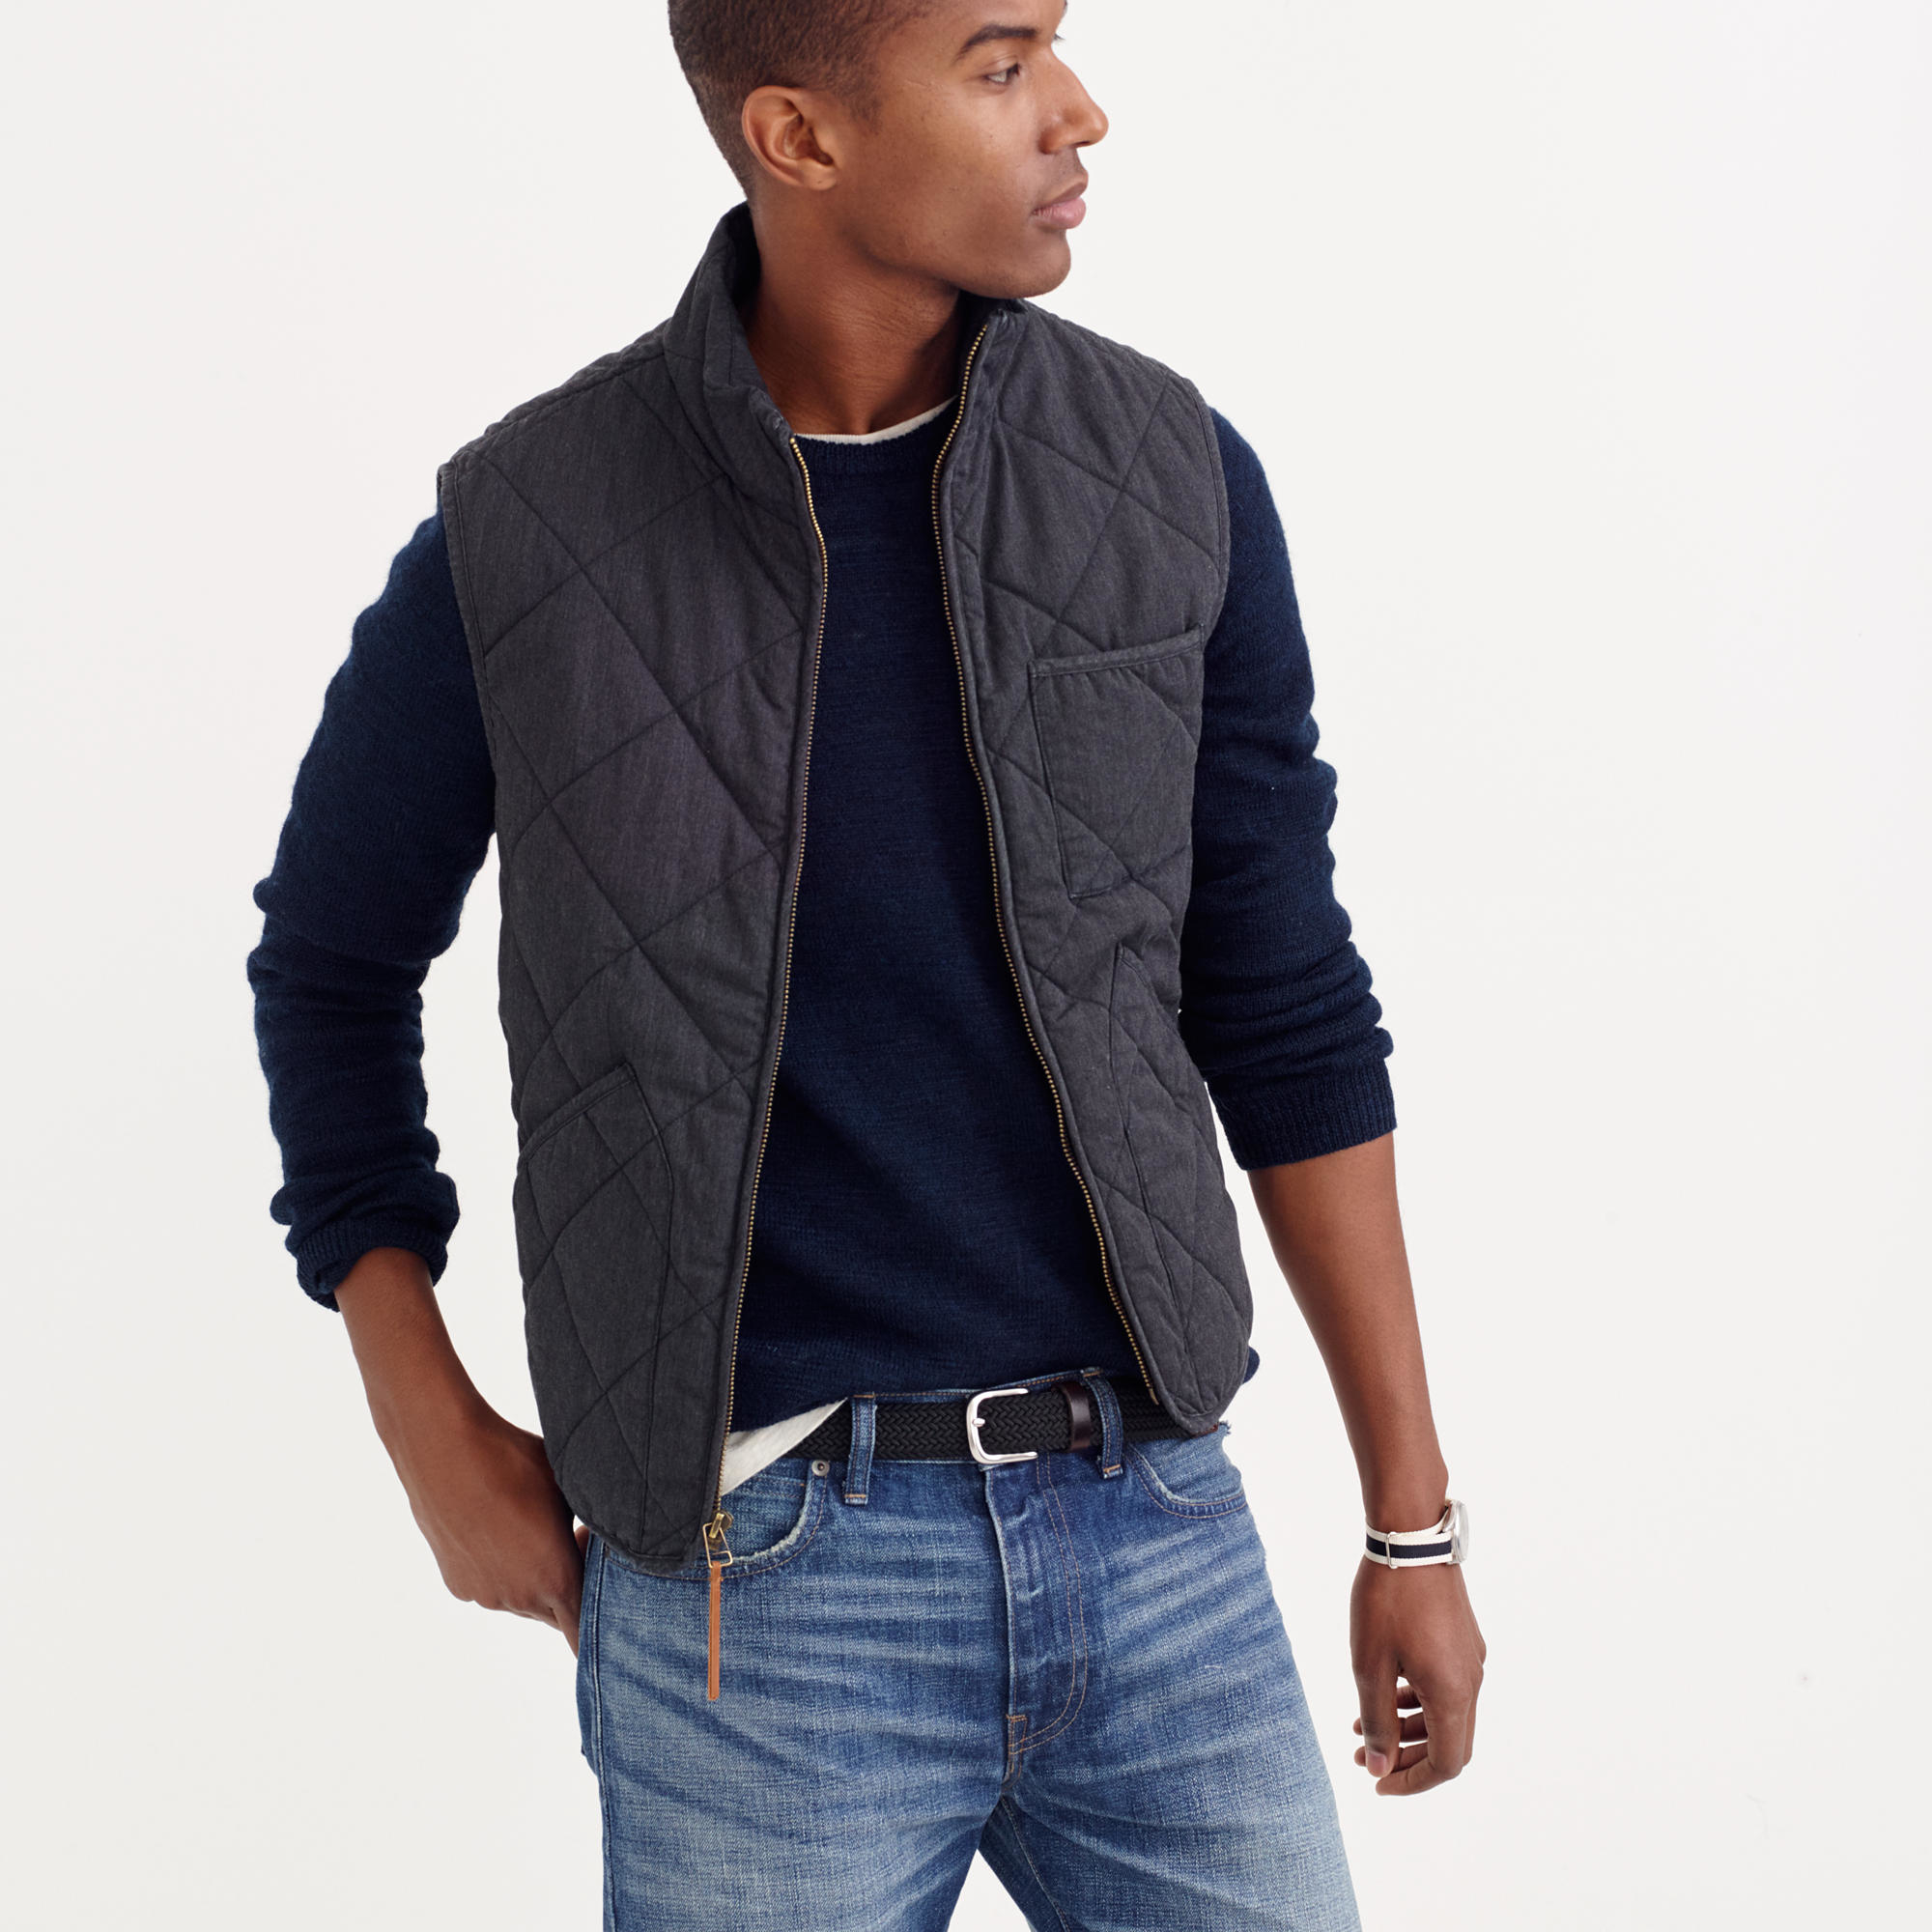 J. Crew Sussex Sherpa-lined Vest with Eco-friendly PrimaLoft - Navy the new...